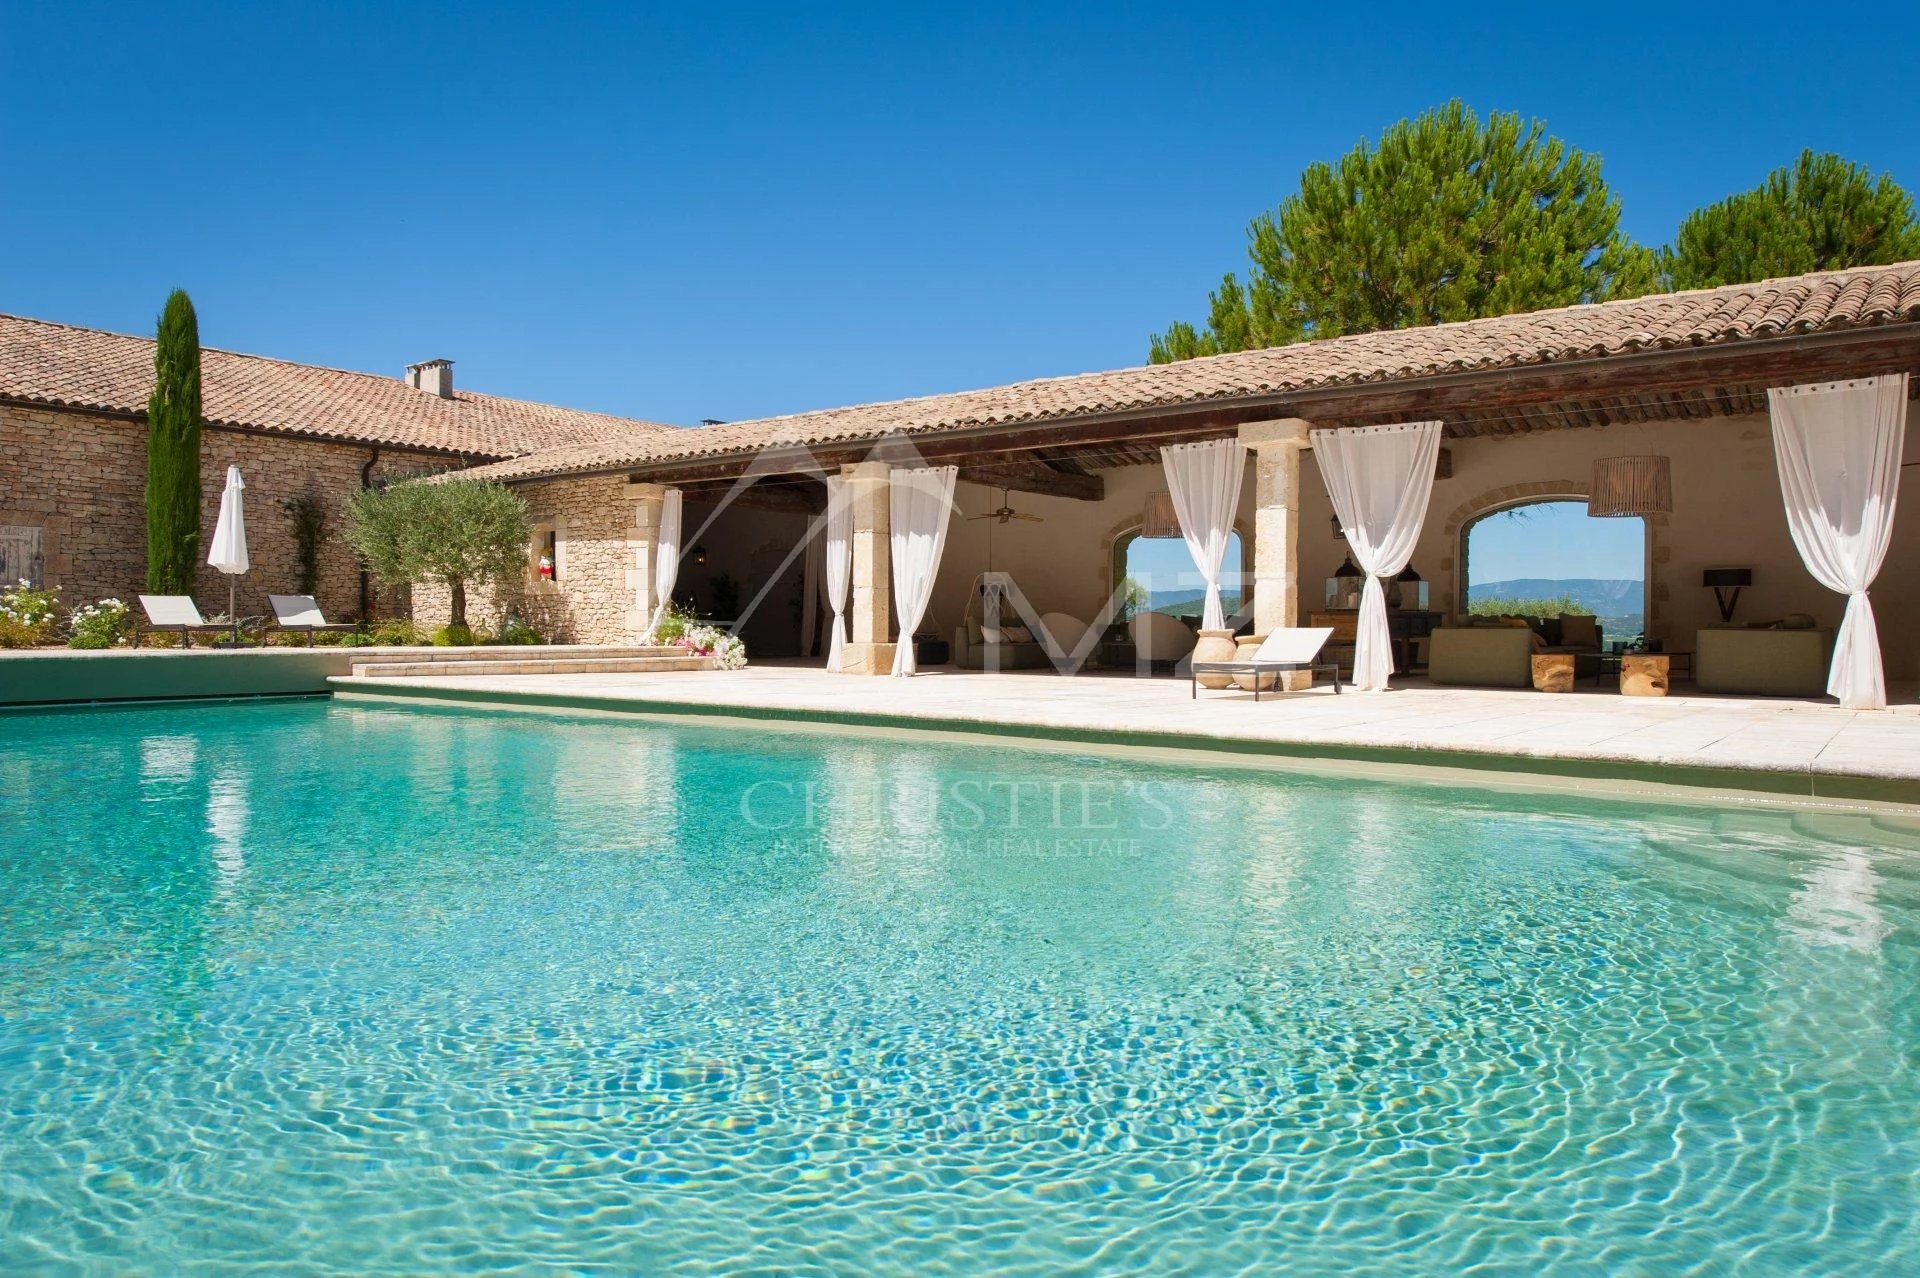 Luberon - Stunning property with heated pool and tennis court